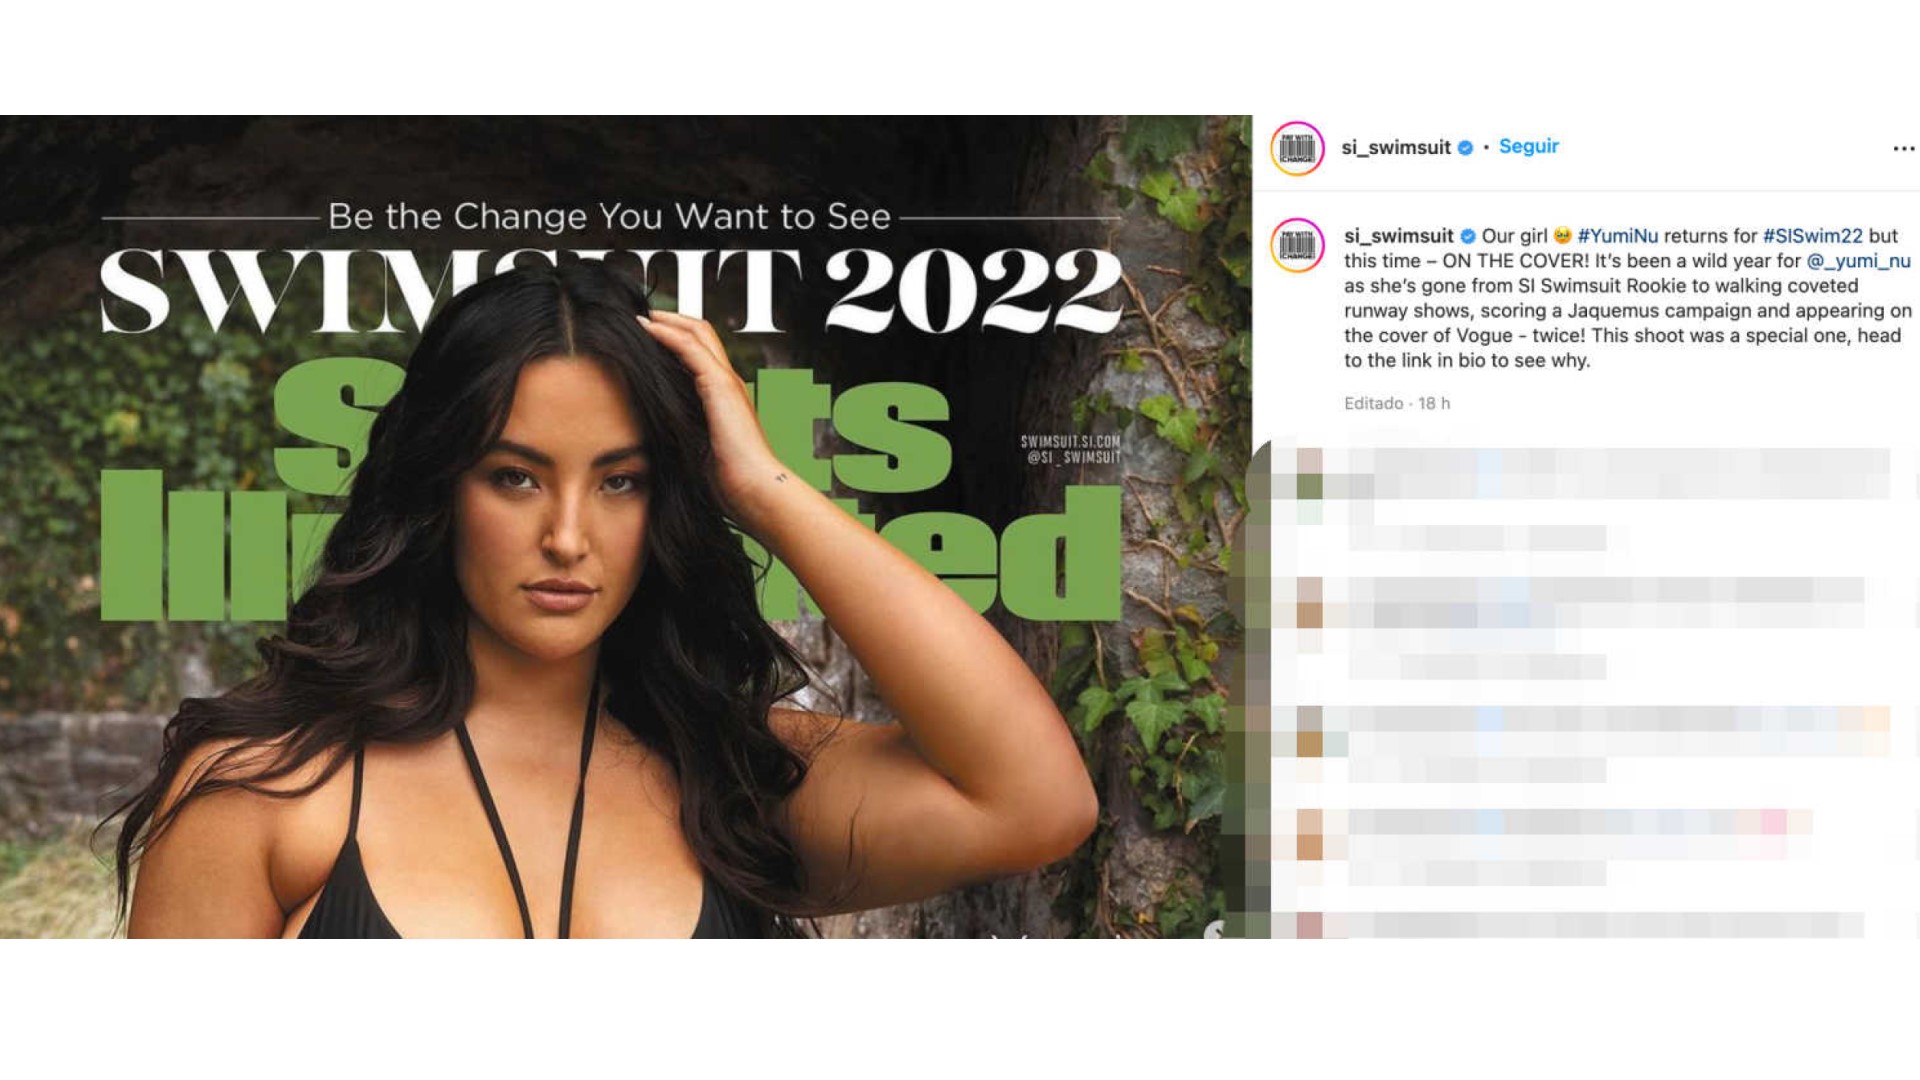 <p>The third of the Sports Illustrated Swimsuit Edition 2022 covers is for Yumi Nu, a well-known singer and plus-size model.</p> <p>Photo: Instagram - @si_swimsuit</p>